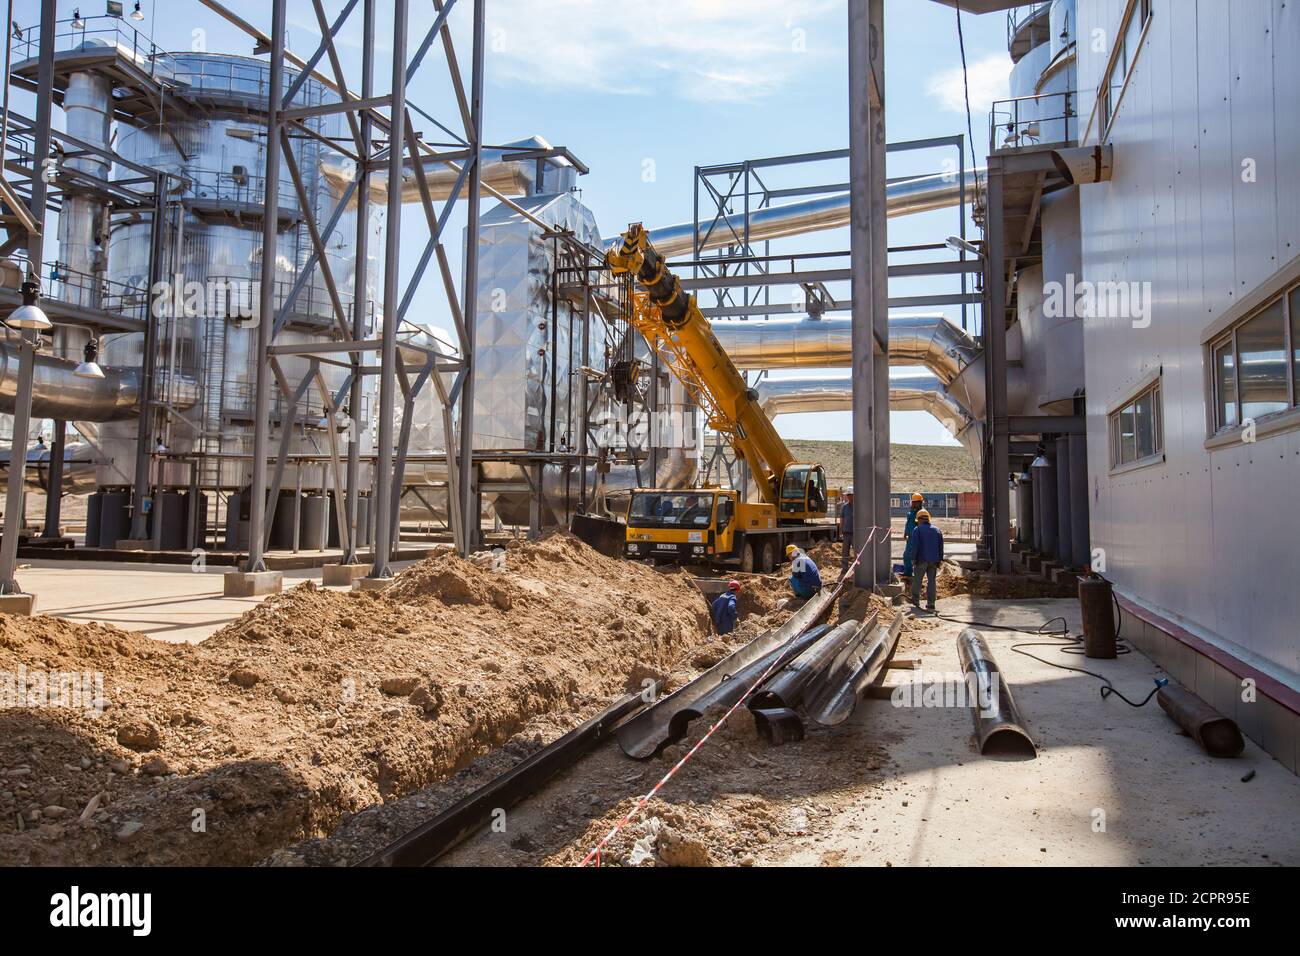 Sulfuric acid plant. Ground works for modernization and renovation with construction workers and mobile crane. Stock Photo